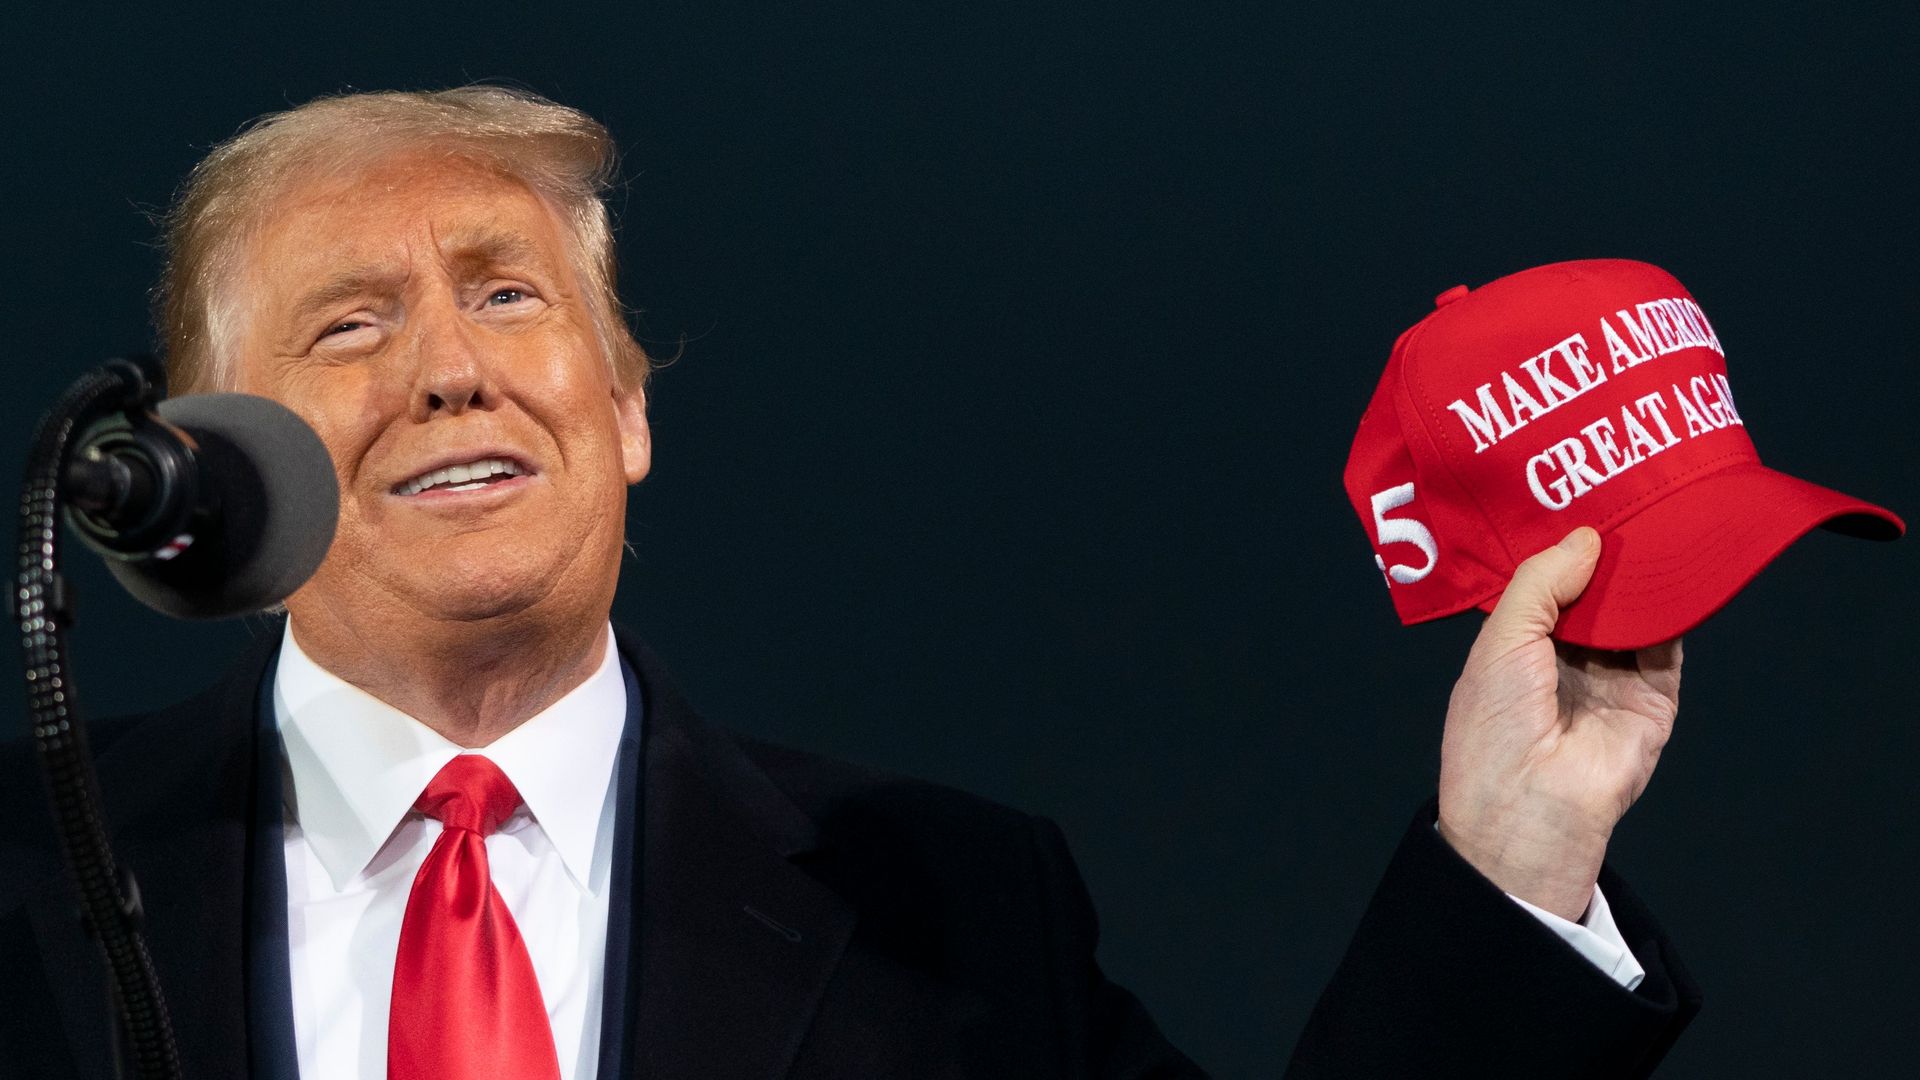 Trump holds a MAGA hat